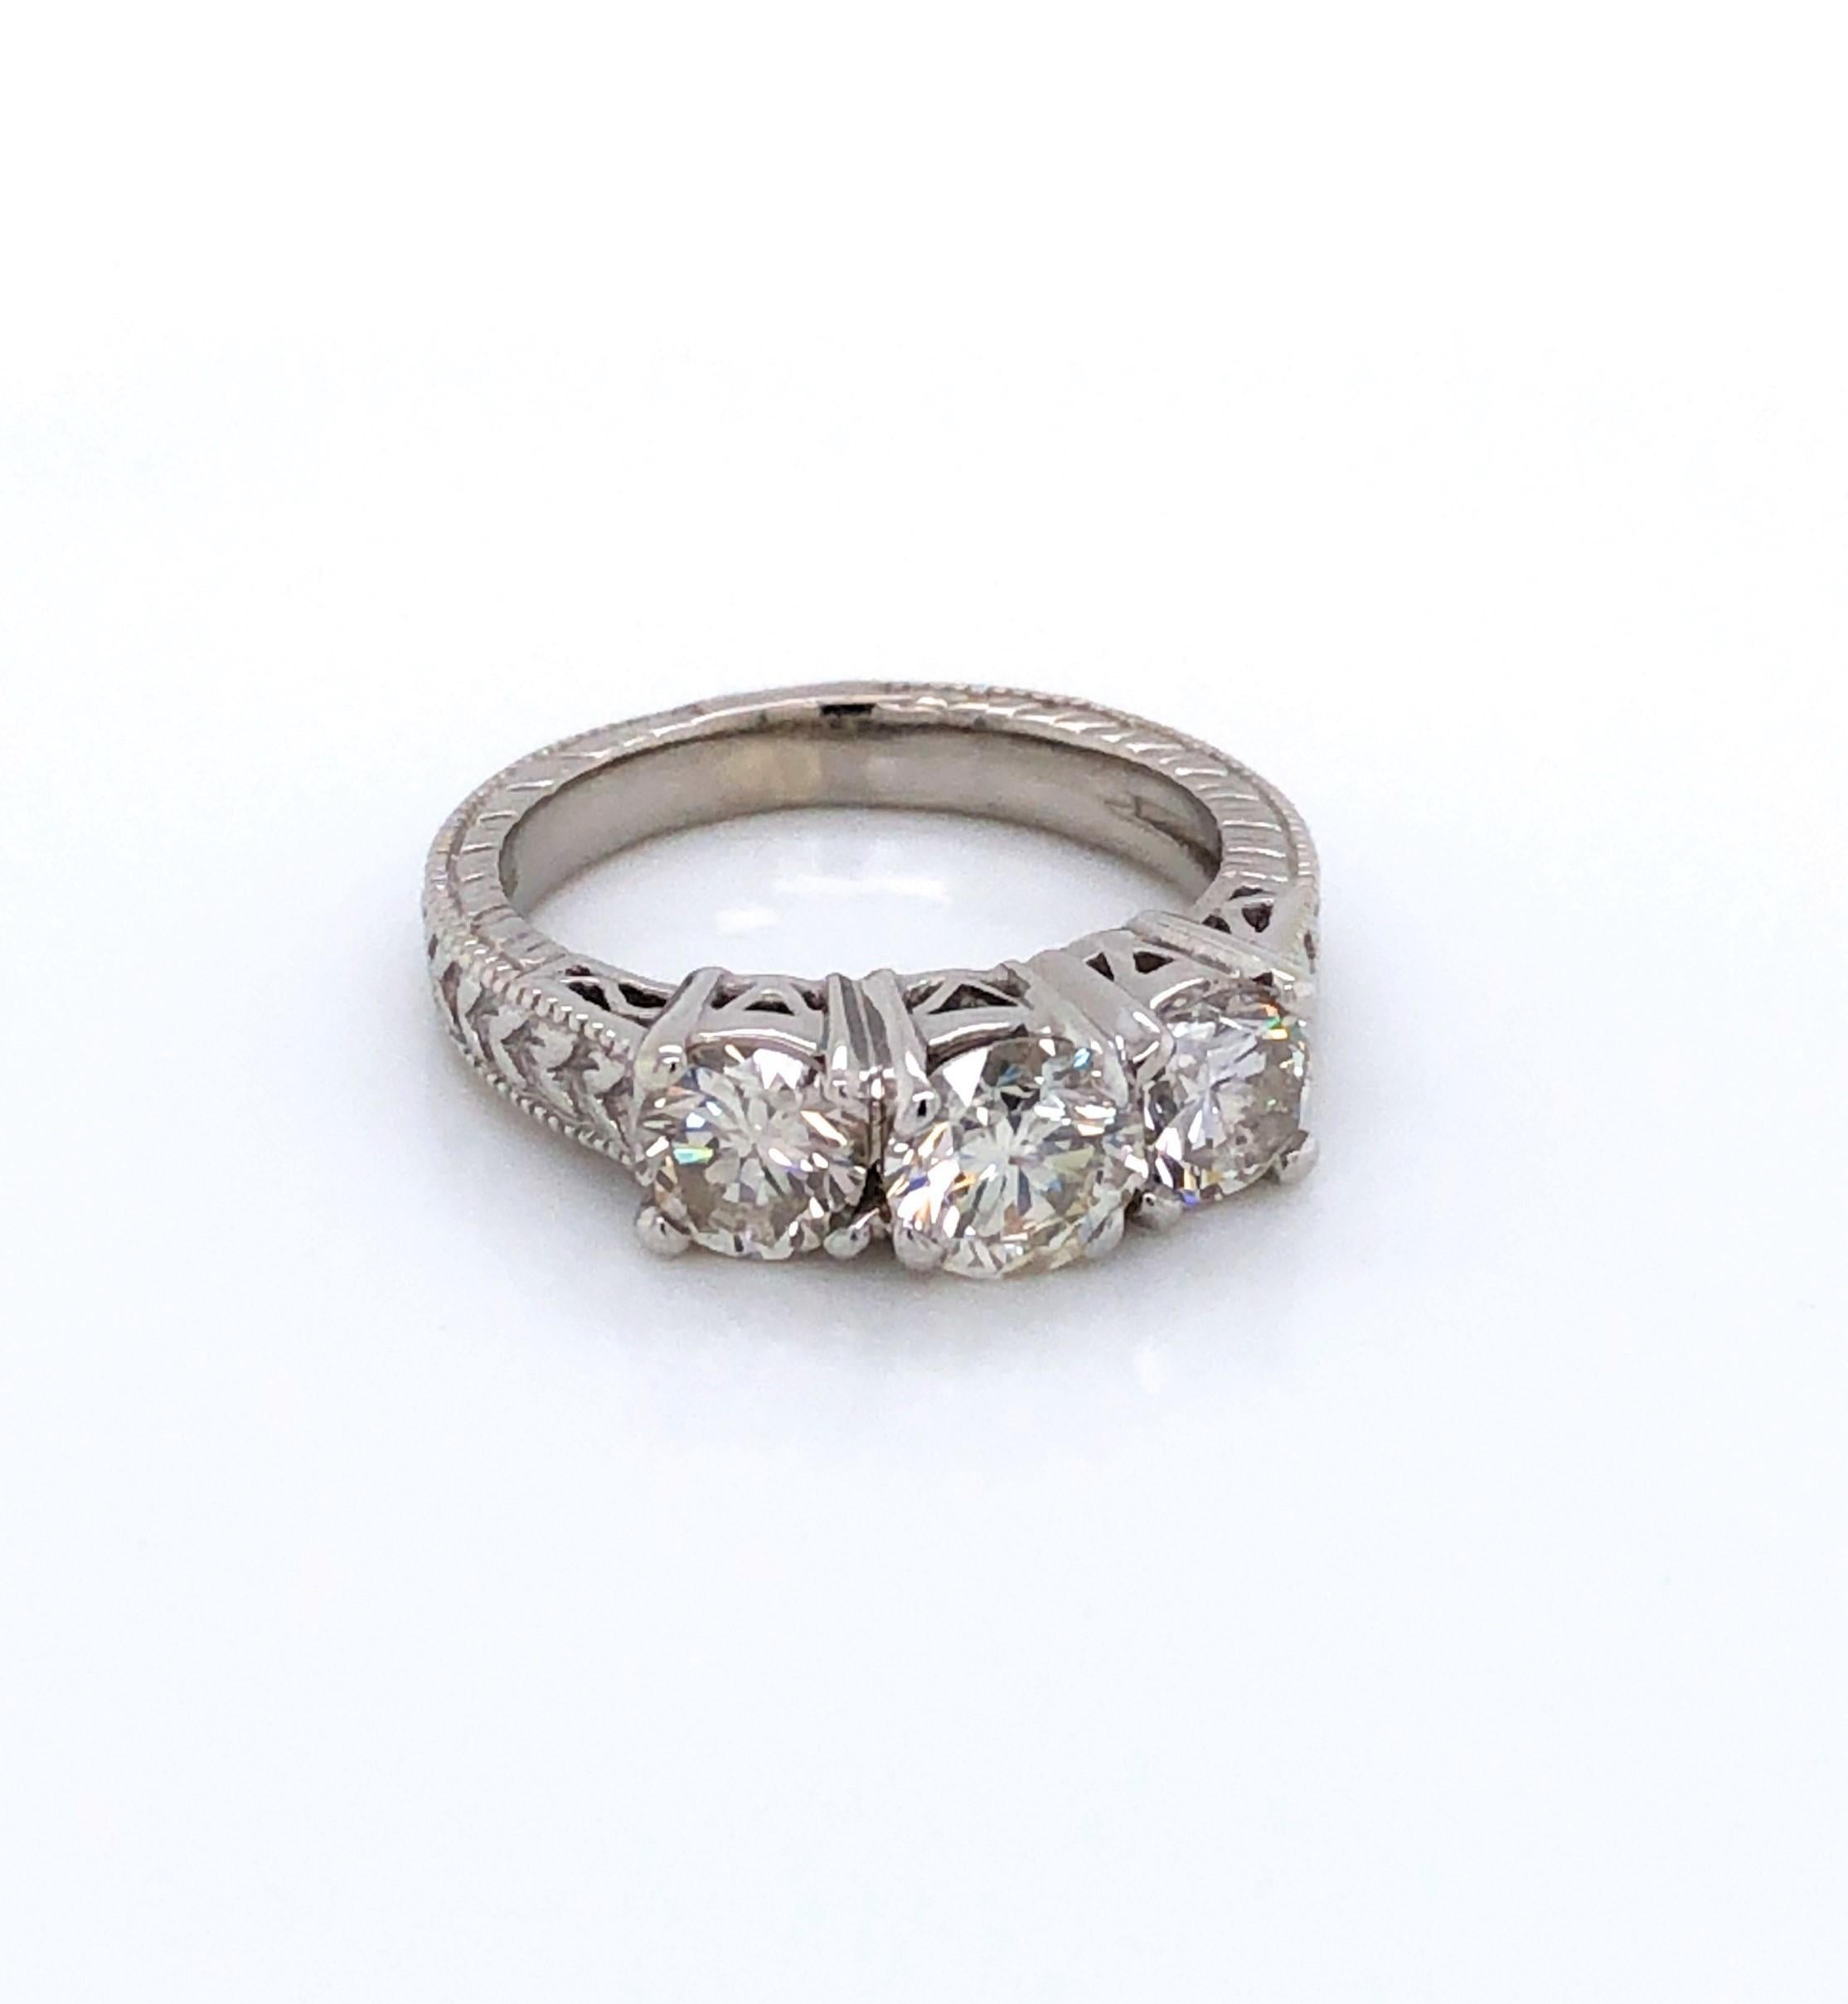 Admire the extra detail of the fancy fourteen karat 14k white gold antique style setting that adds to the classic beauty of this fine three stone diamond engagement ring. 
Prominently displayed are three round brilliant cut diamonds with the center